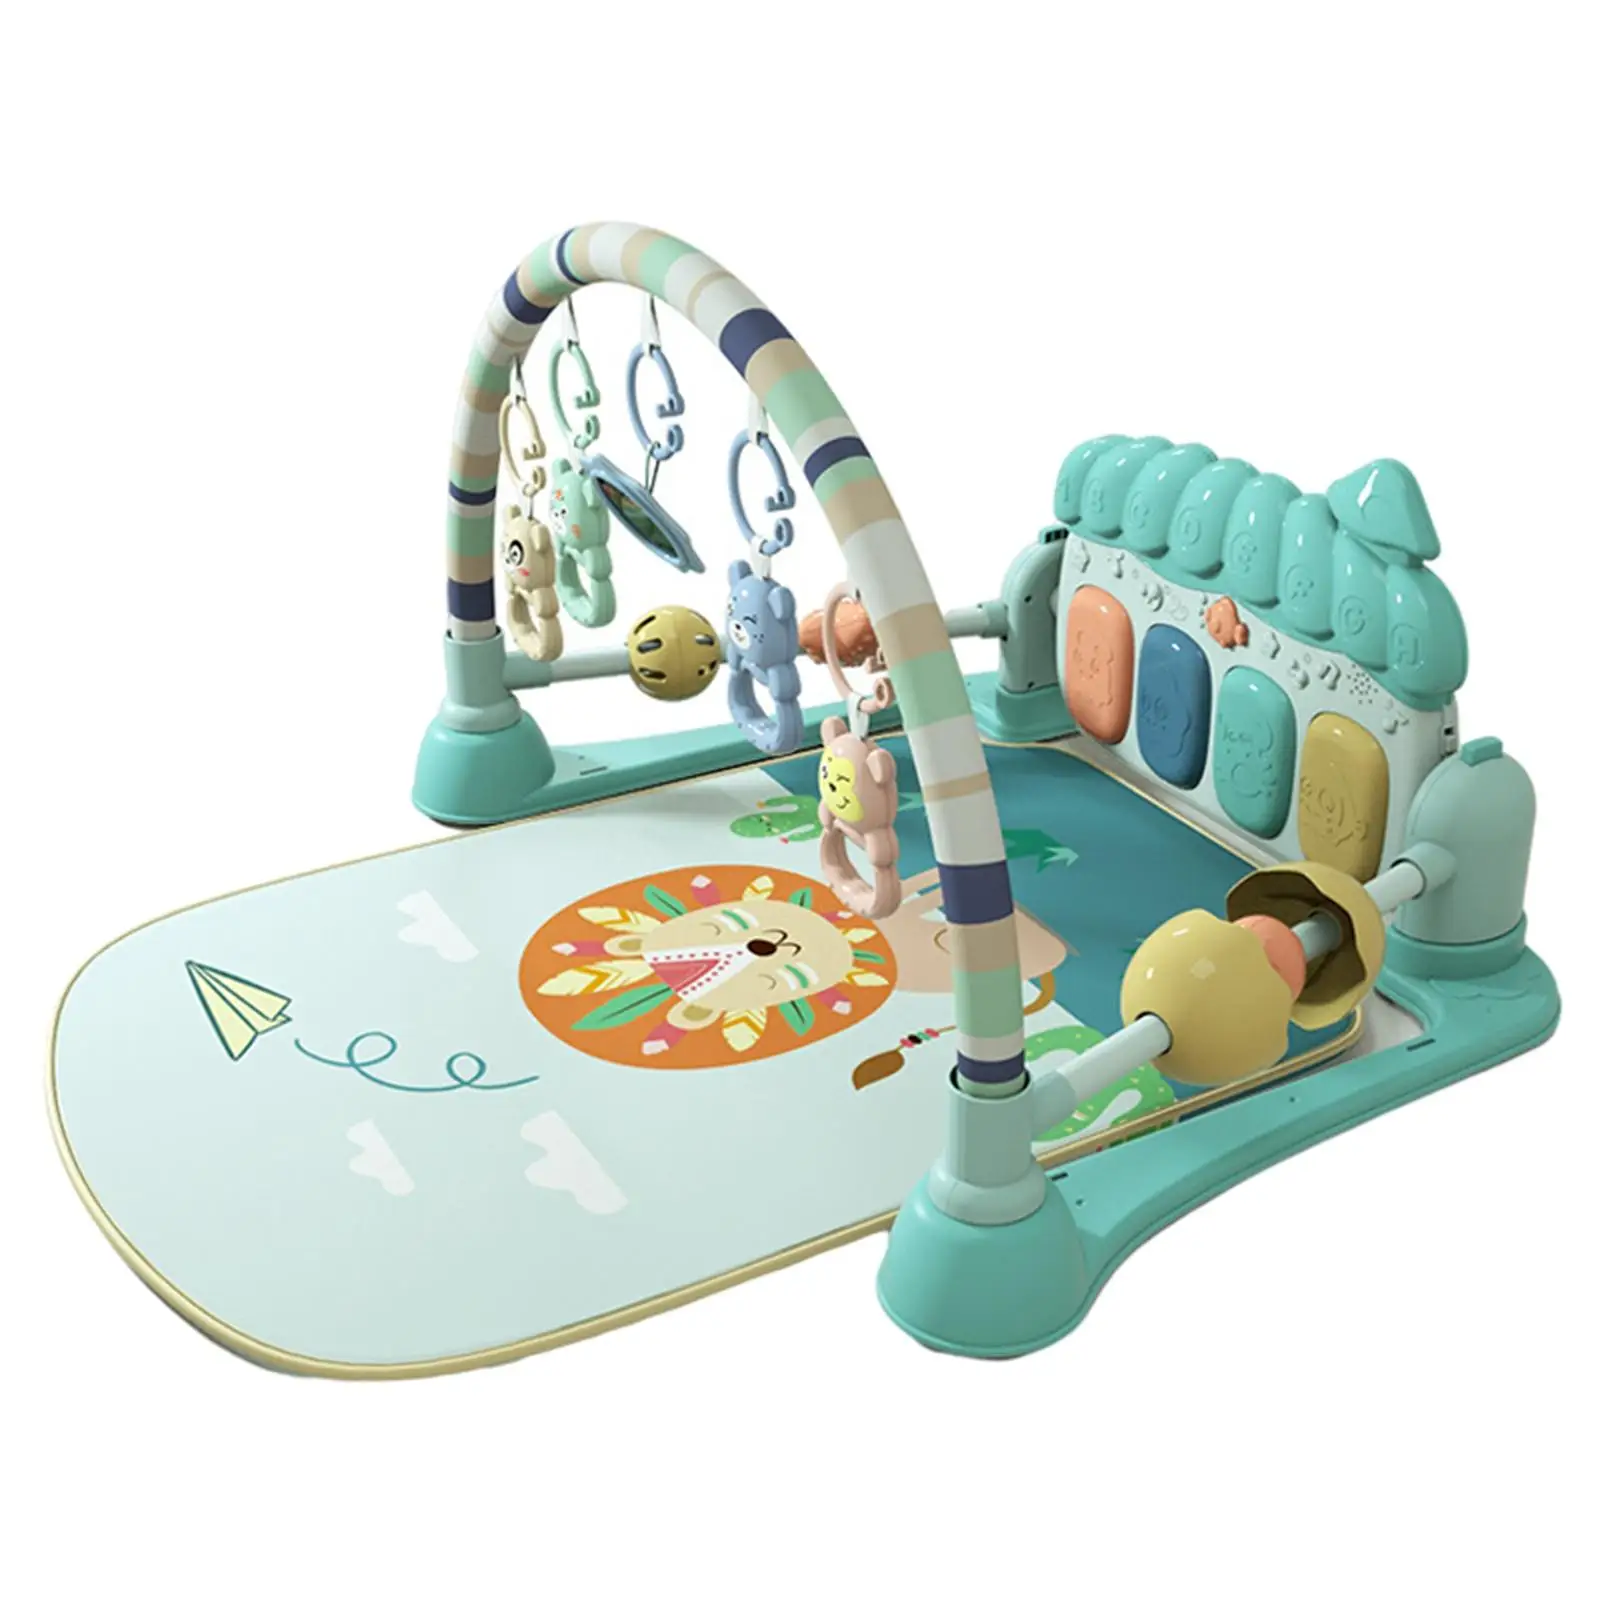 Baby Gym Play Mat Infant Puzzle with Piano Sound and Music Crawling Activity Rug Gift for 6-18 Months